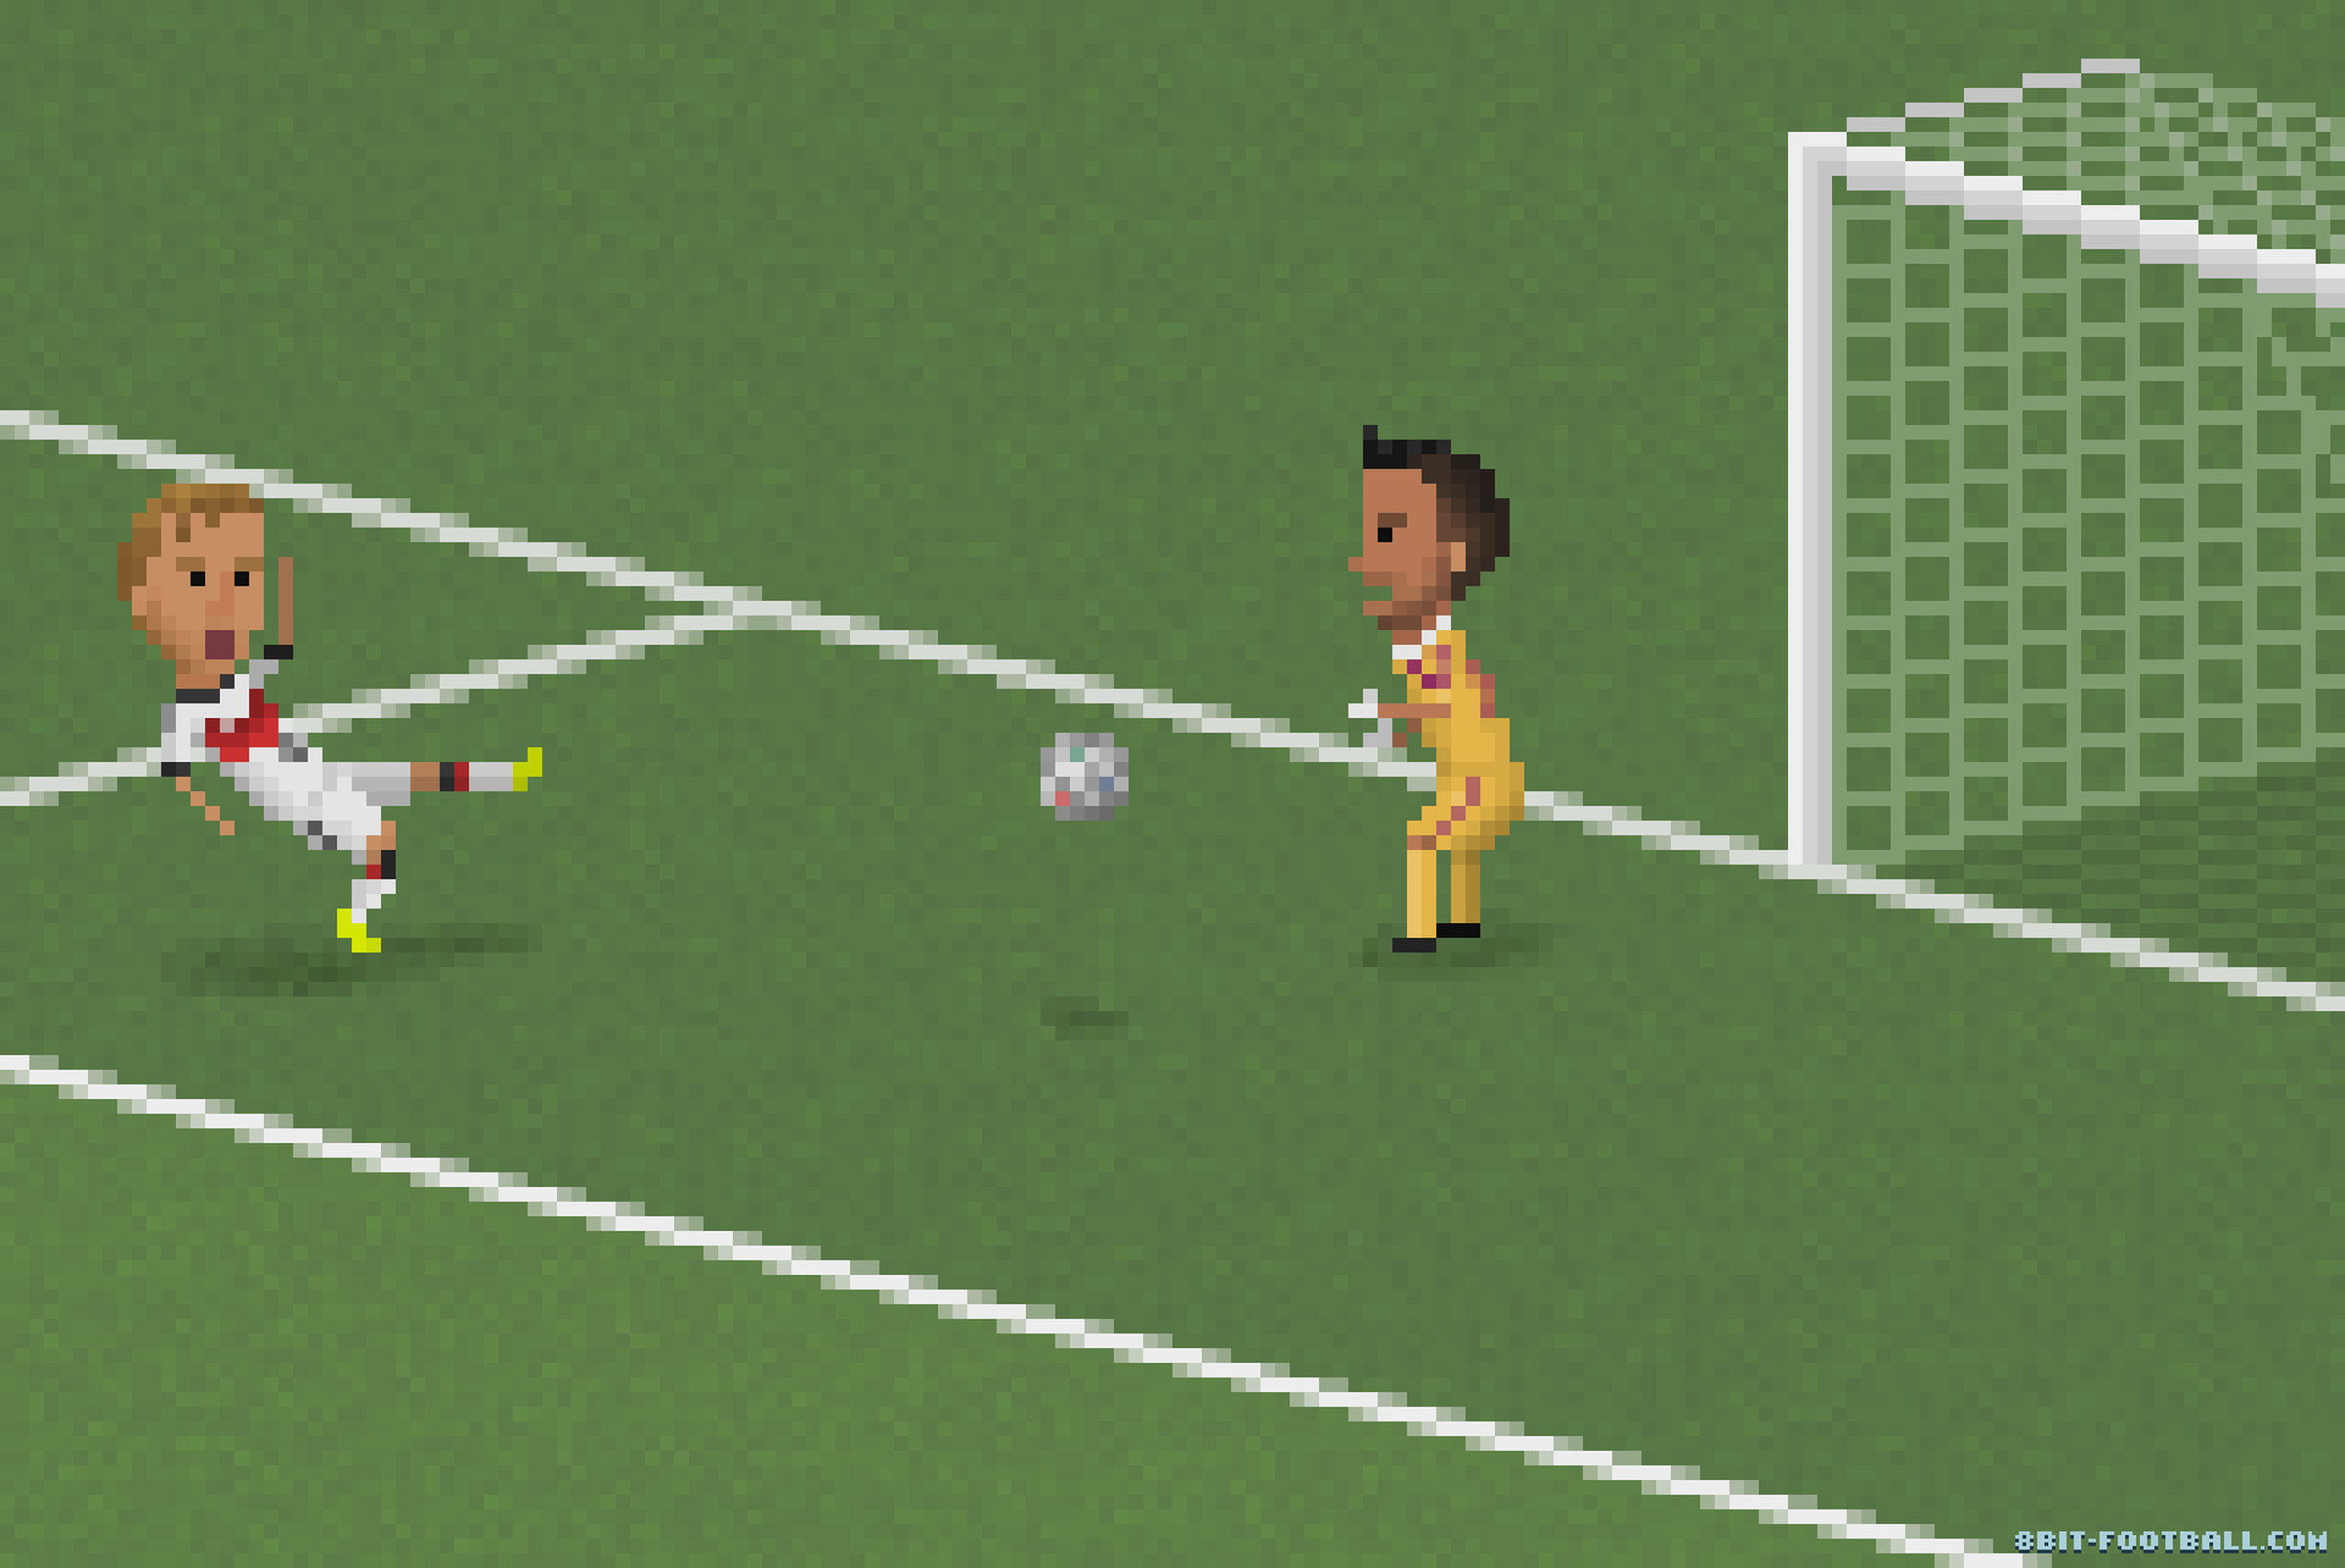 The World Cup's biggest moments in 8-bit art